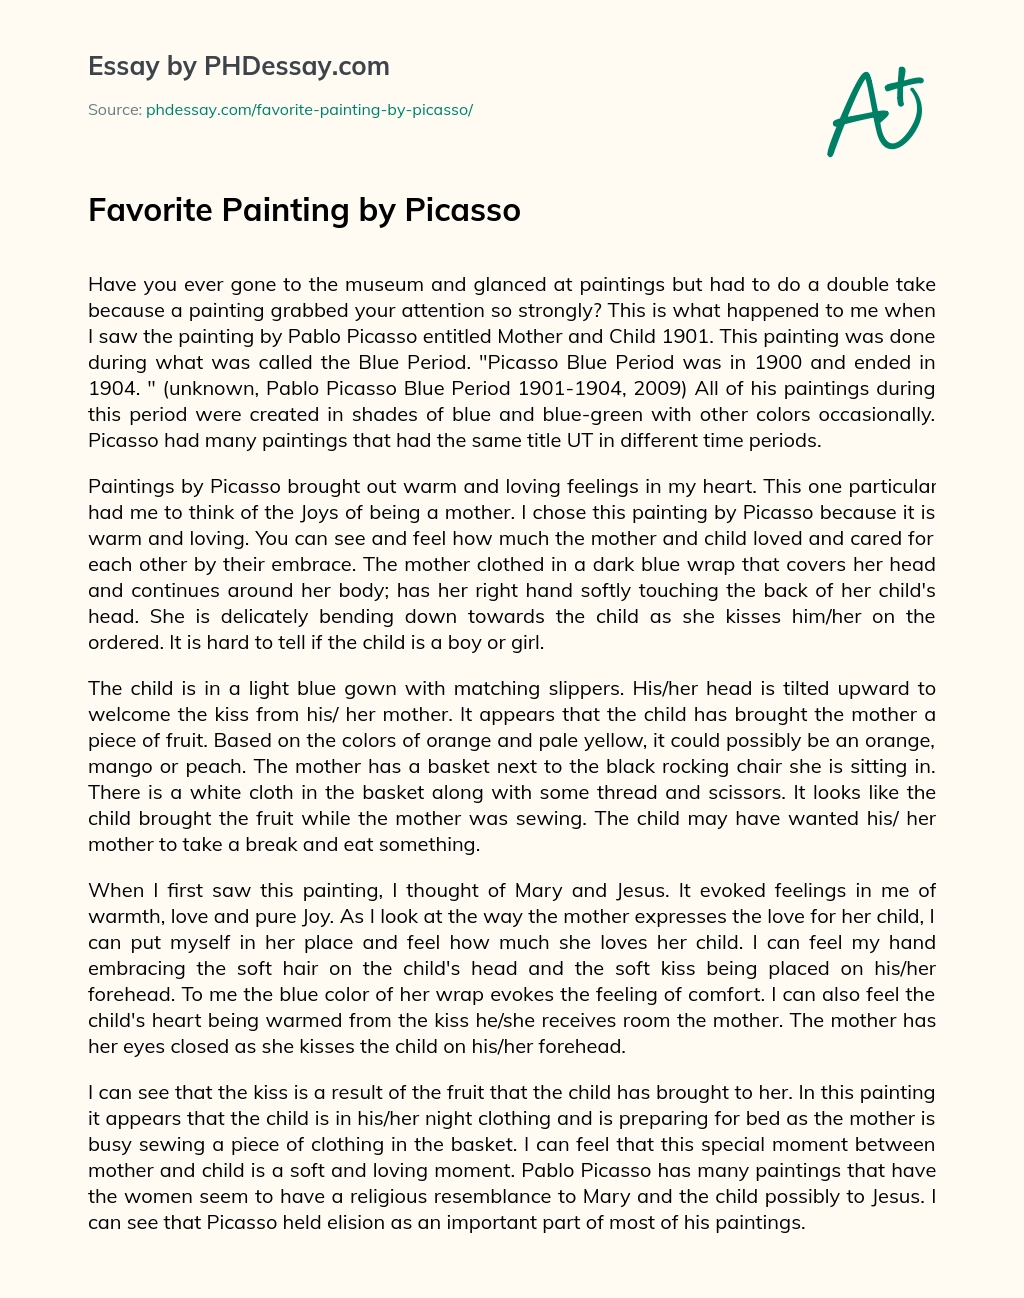 Favorite Painting by Picasso essay